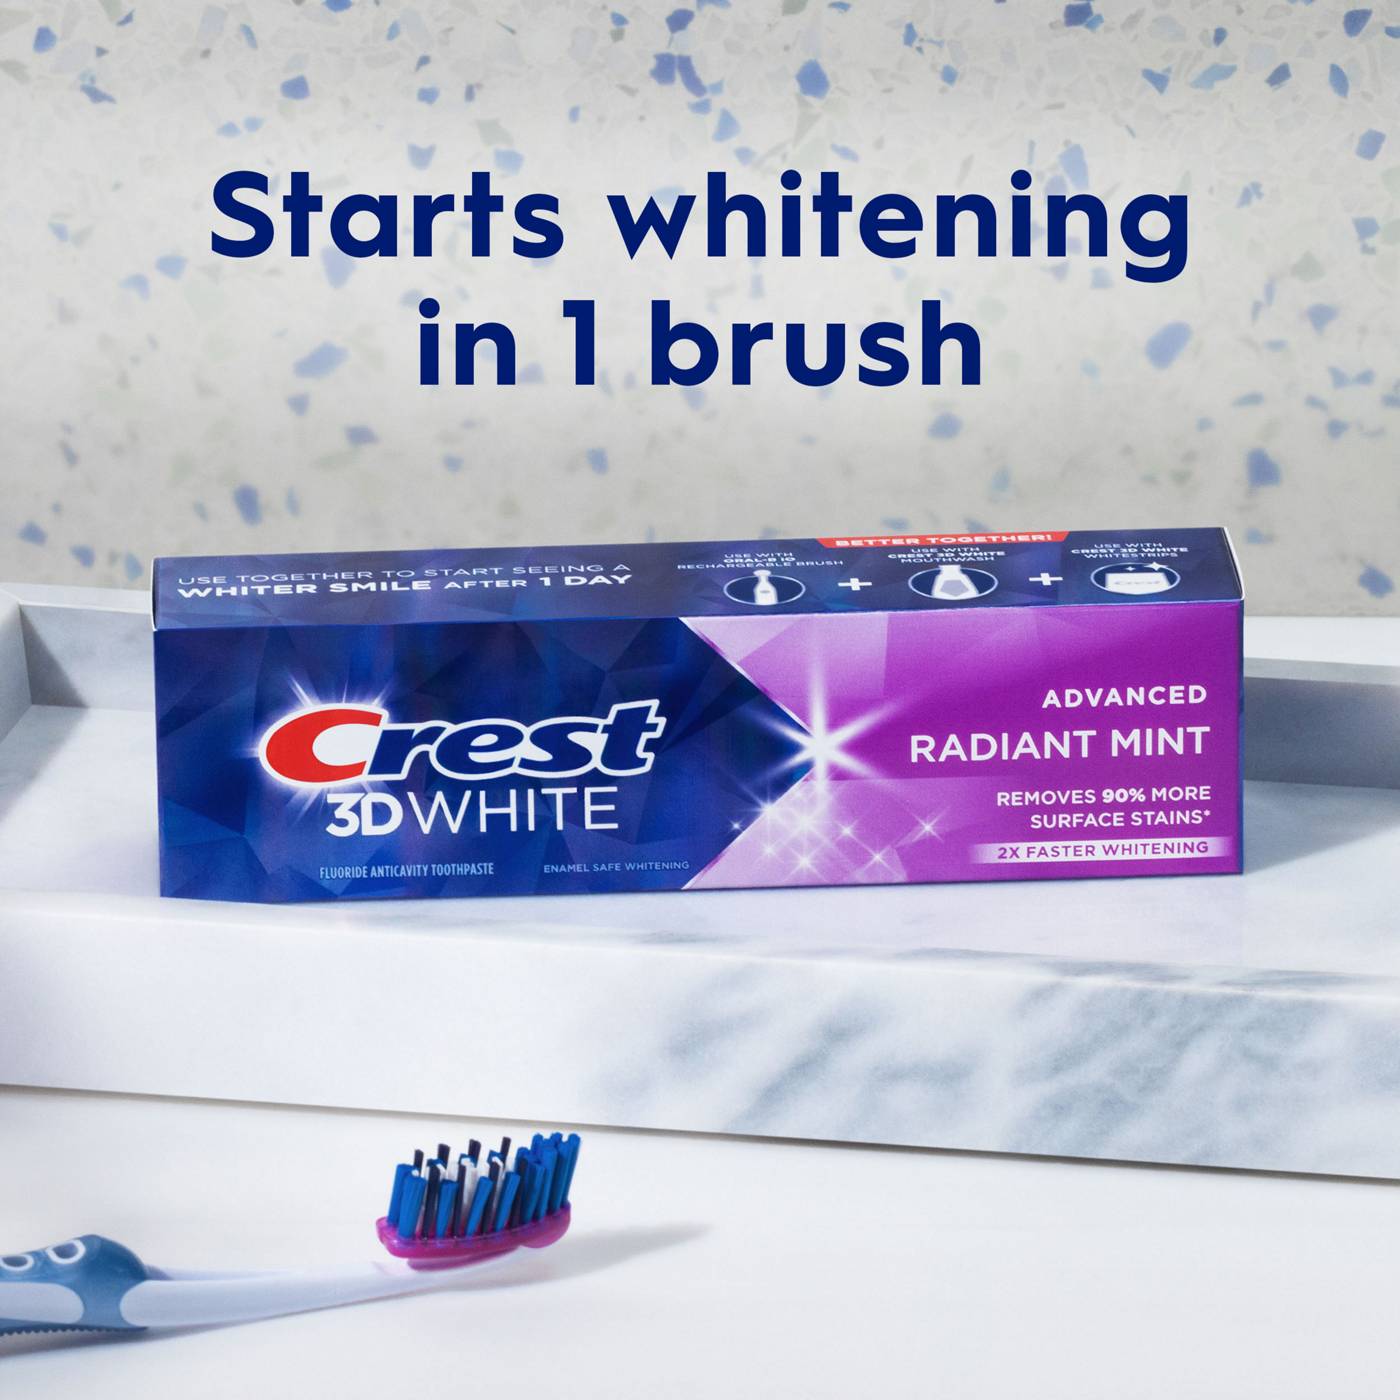 Crest 3D White Whitening Toothpaste - Radiant Mint; image 5 of 8